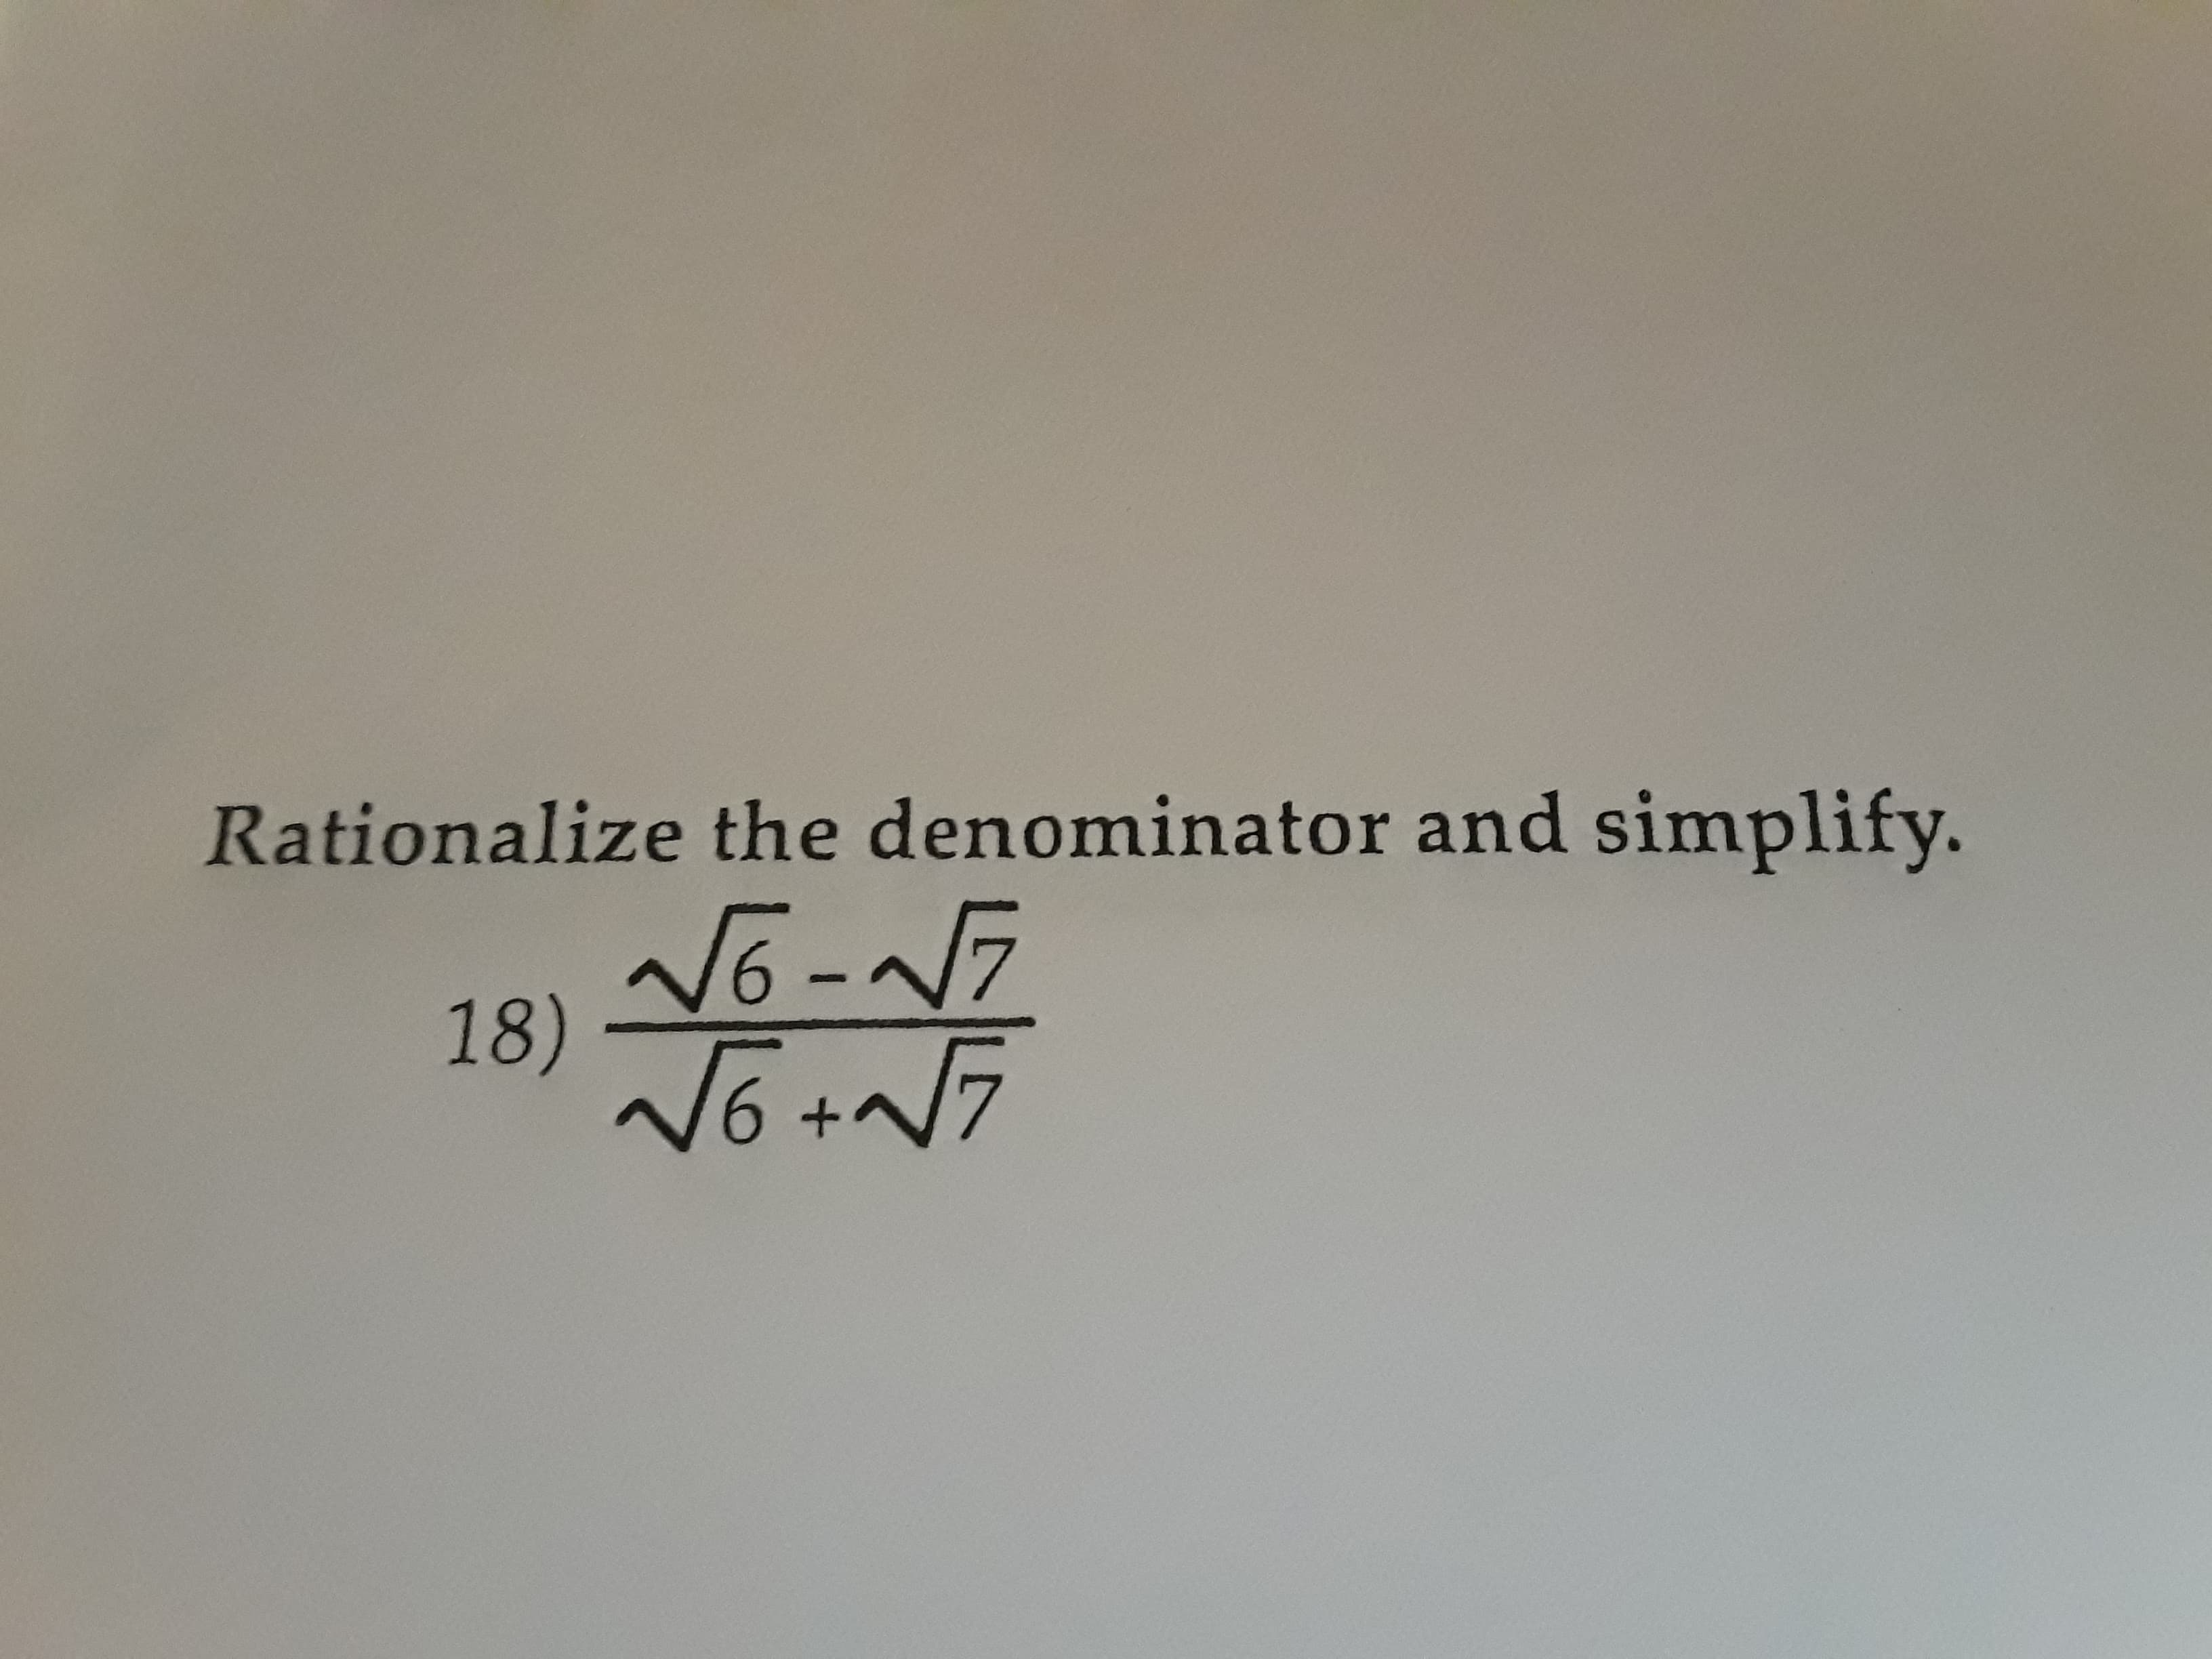 Rationalize the denominator and simplify.
6
NG-N7
18)
+A
